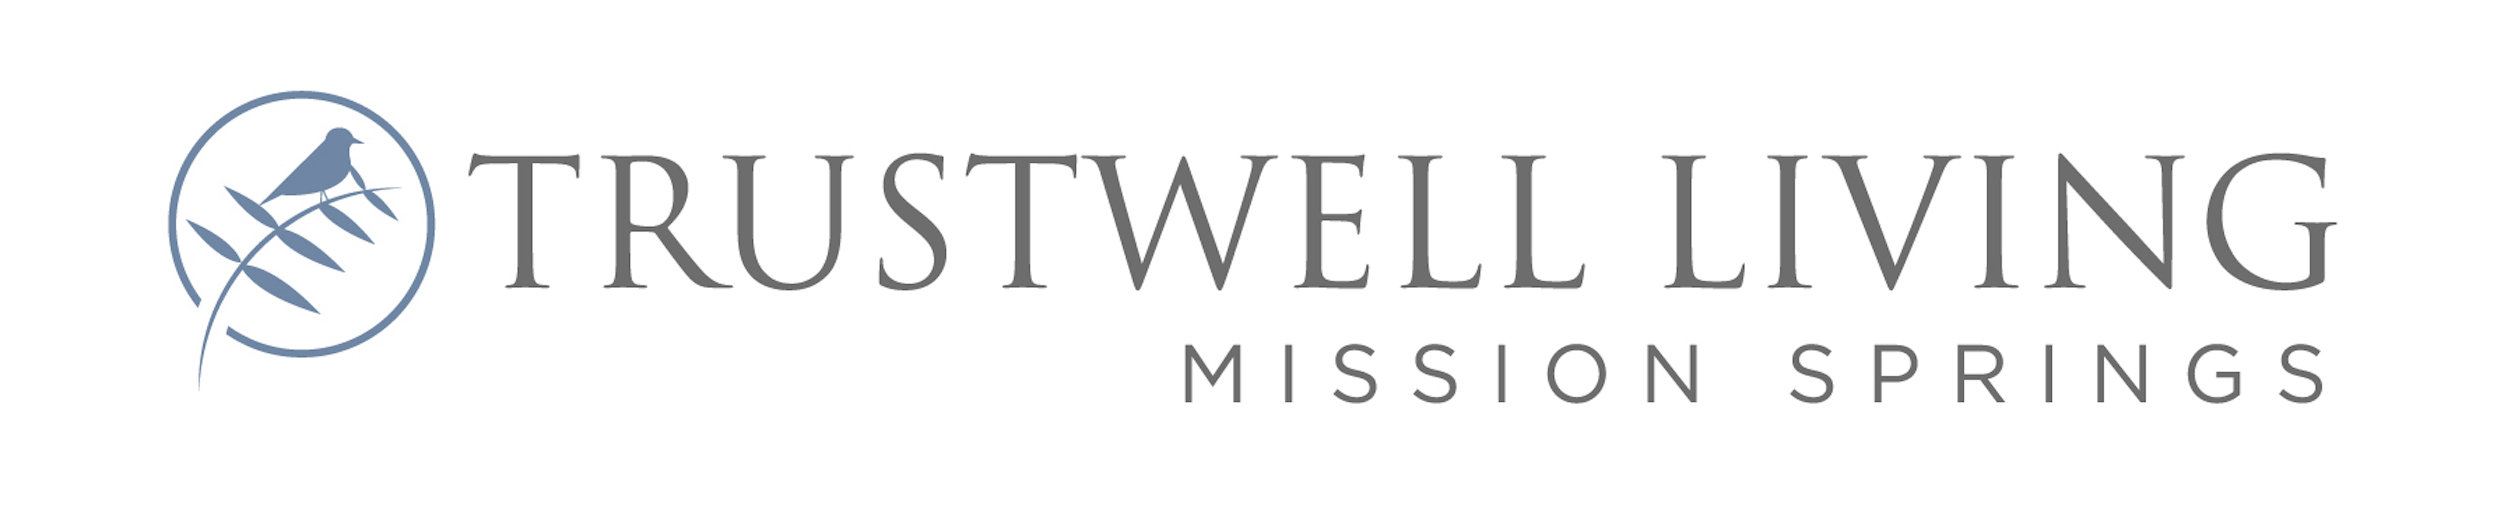 Trustwell Living Mission Springs